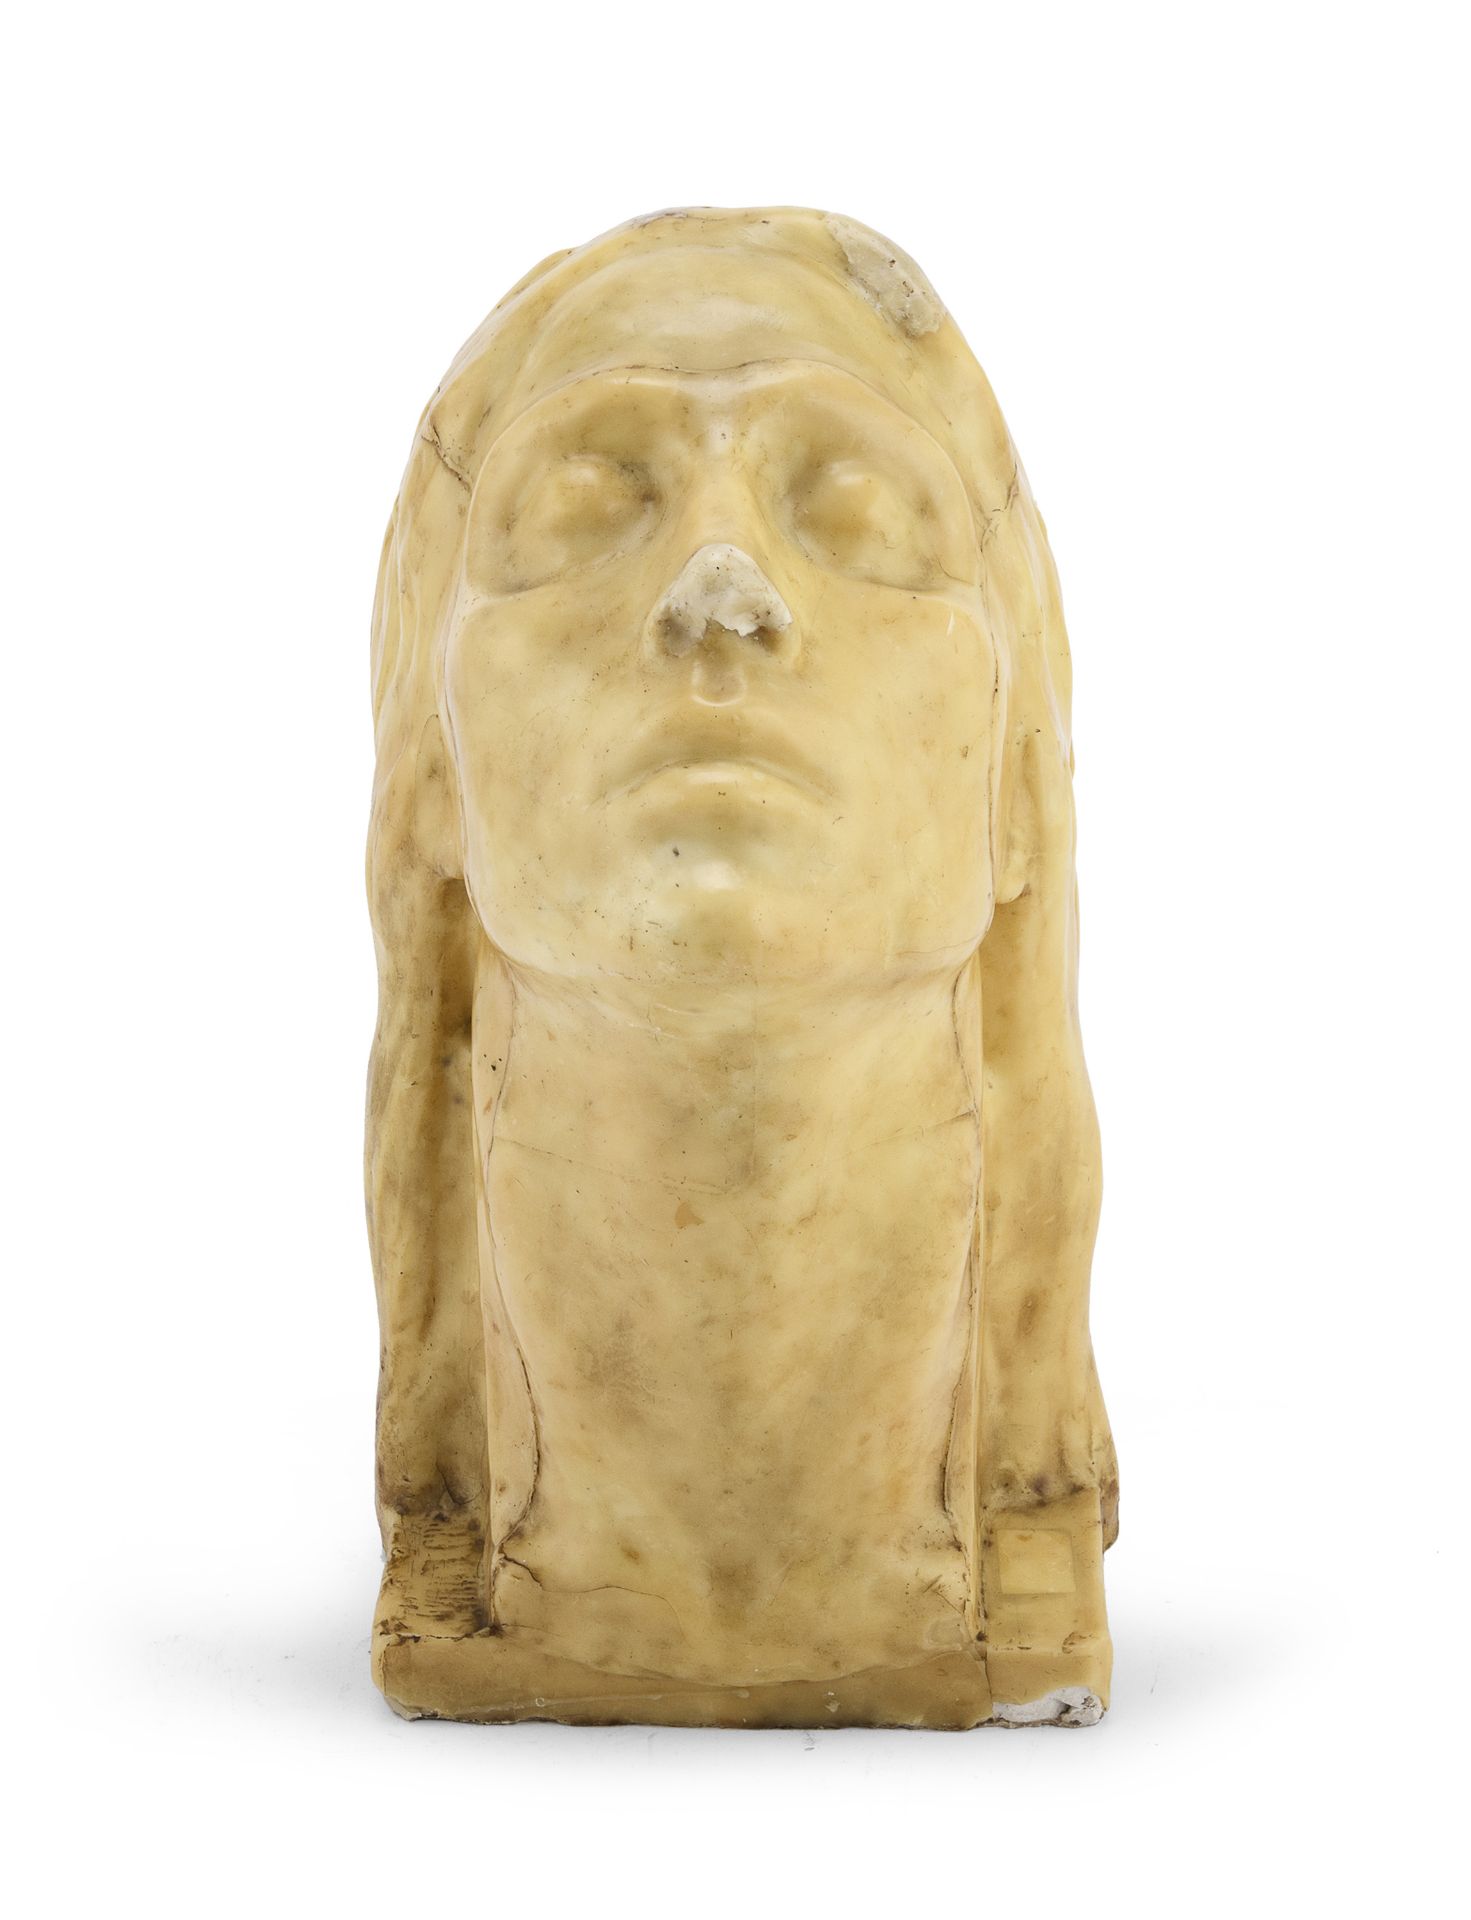 WOMAN'S HEAD IN PLASTER AND WAX 20TH CENTURY - Image 2 of 2